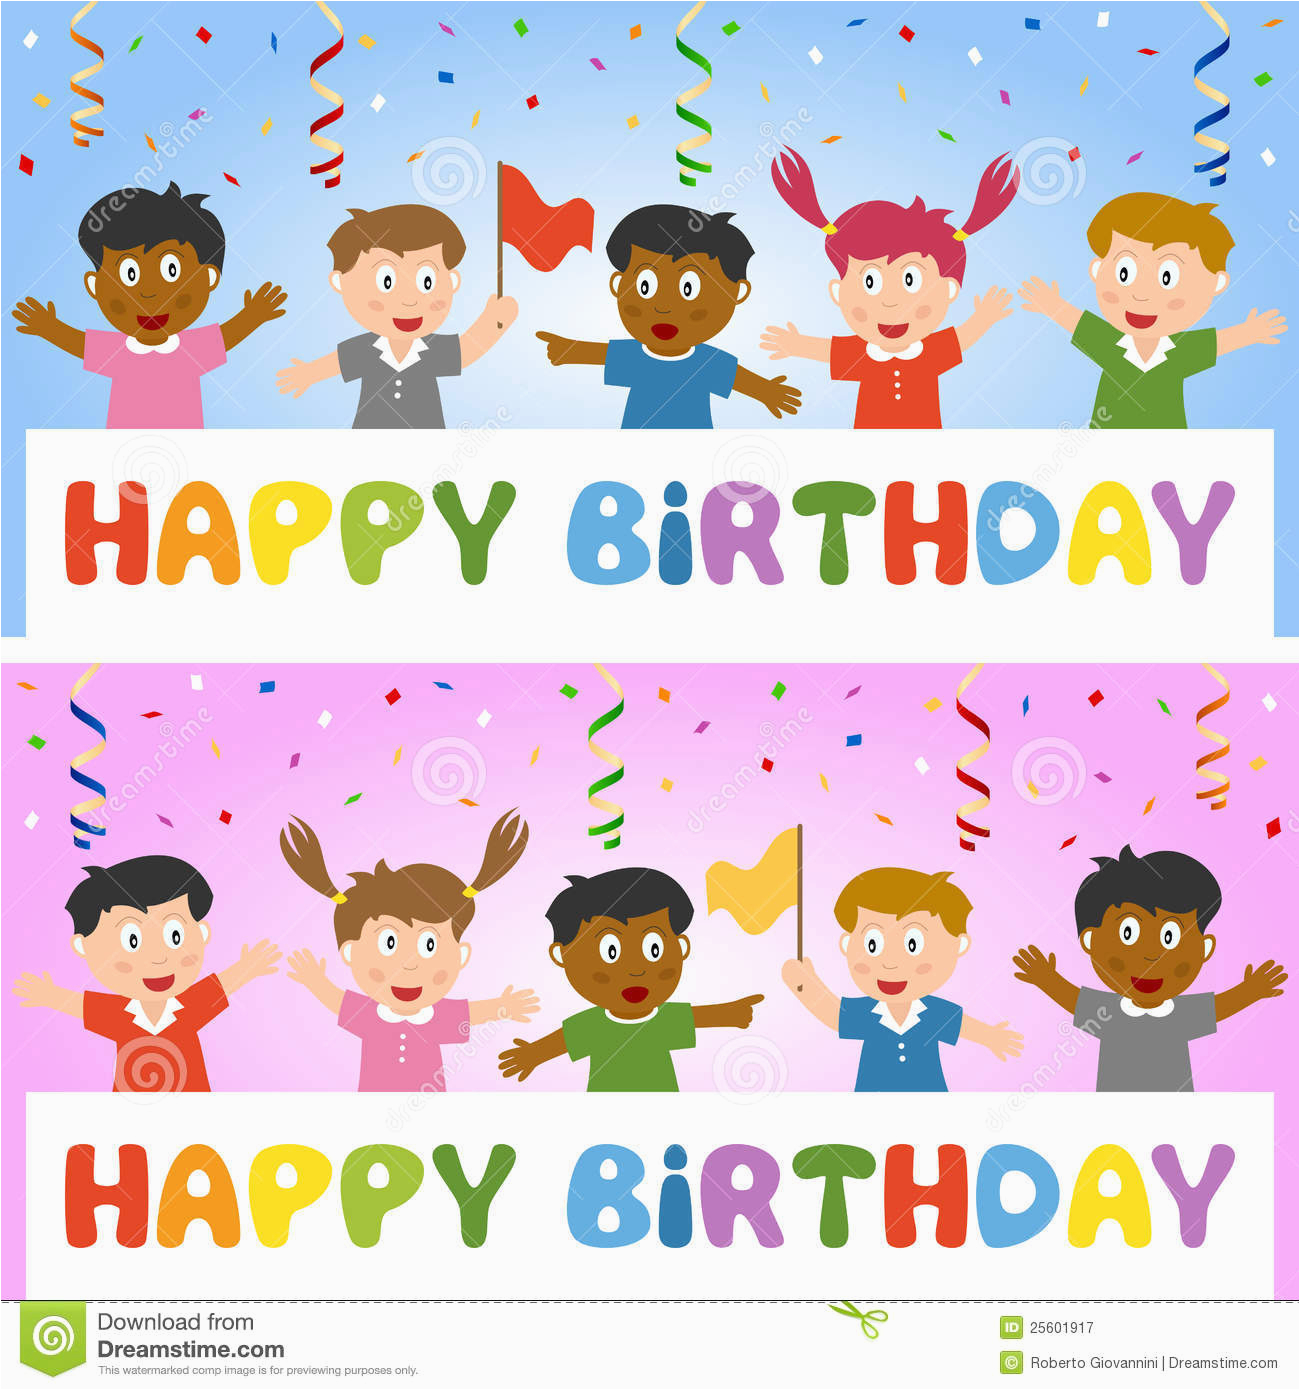 royalty free stock photography birthday banner kids image25601917